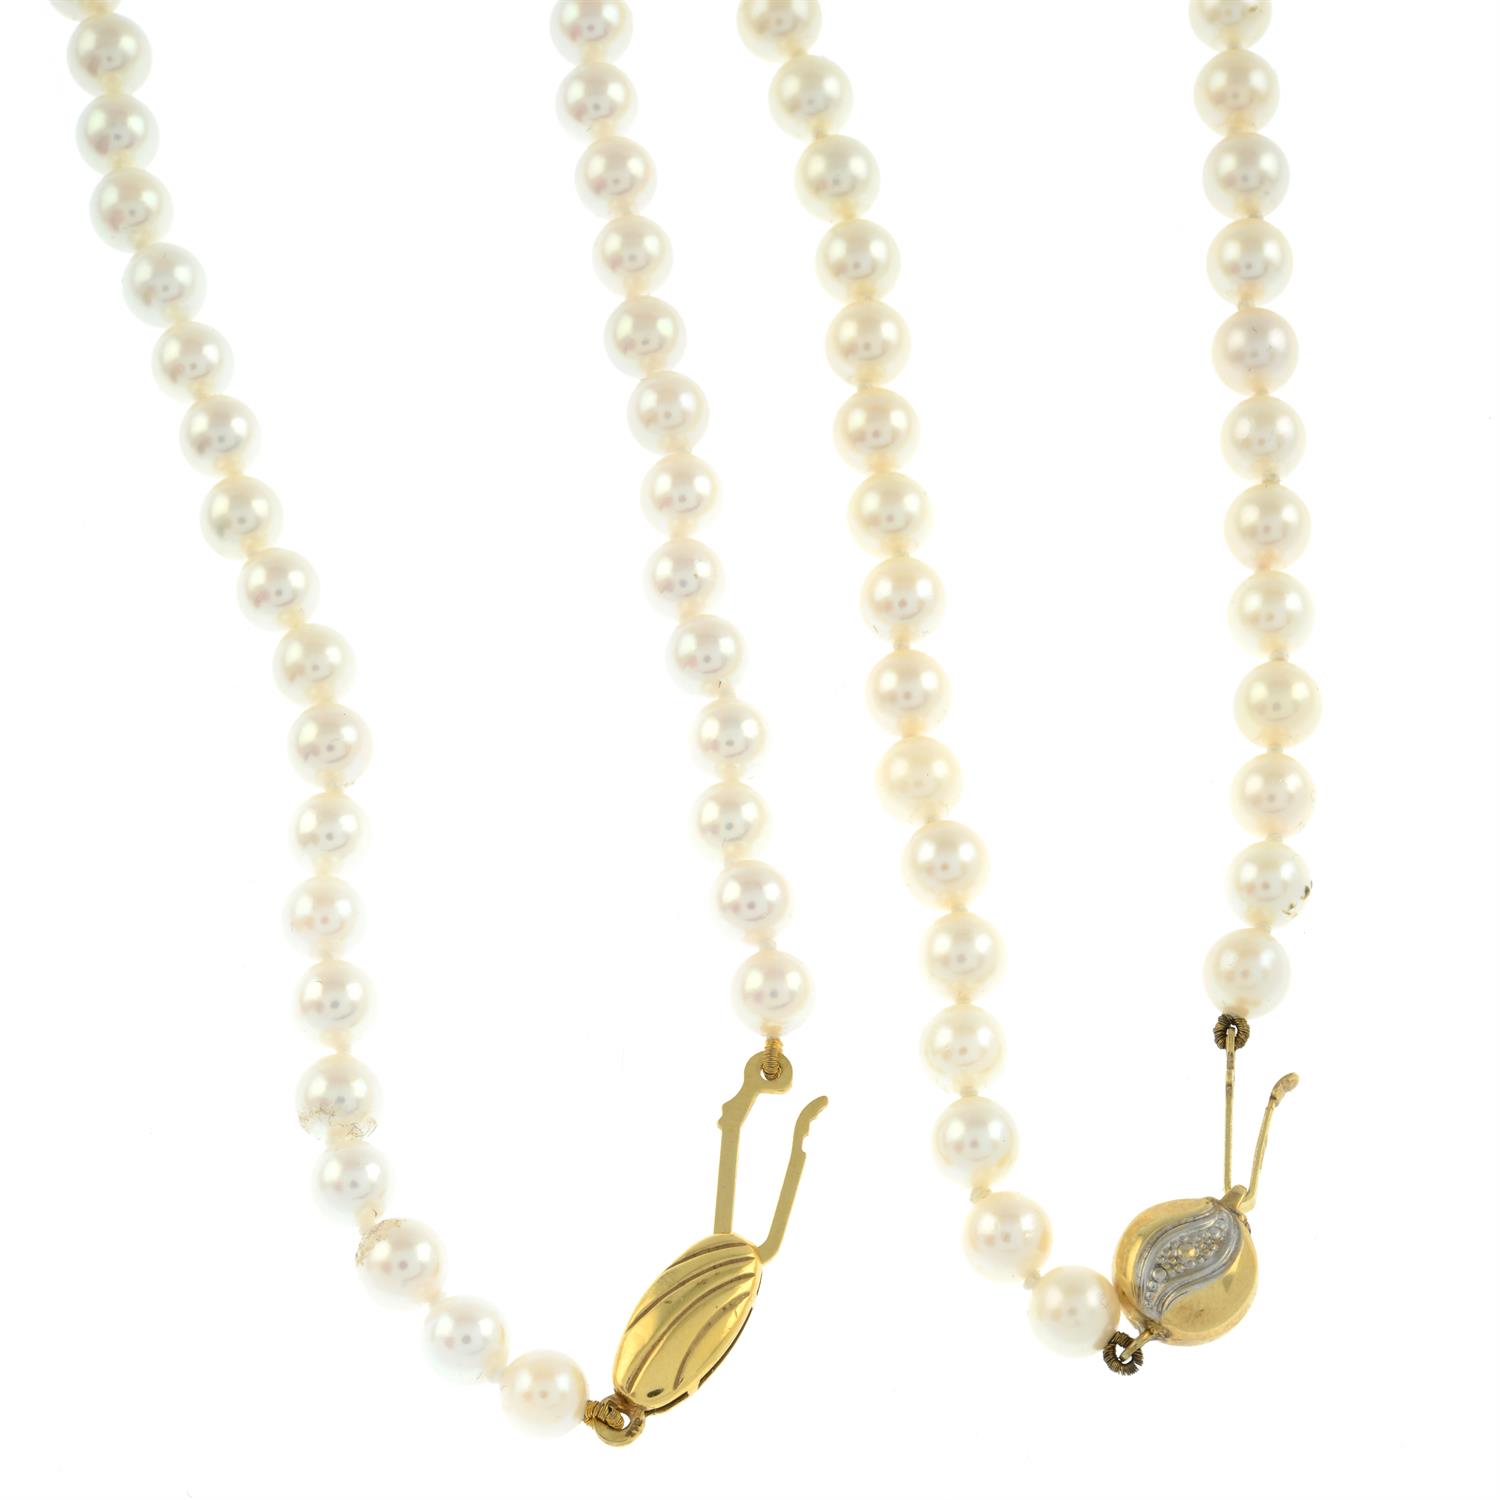 Two cultured pearl necklaces - Image 2 of 3